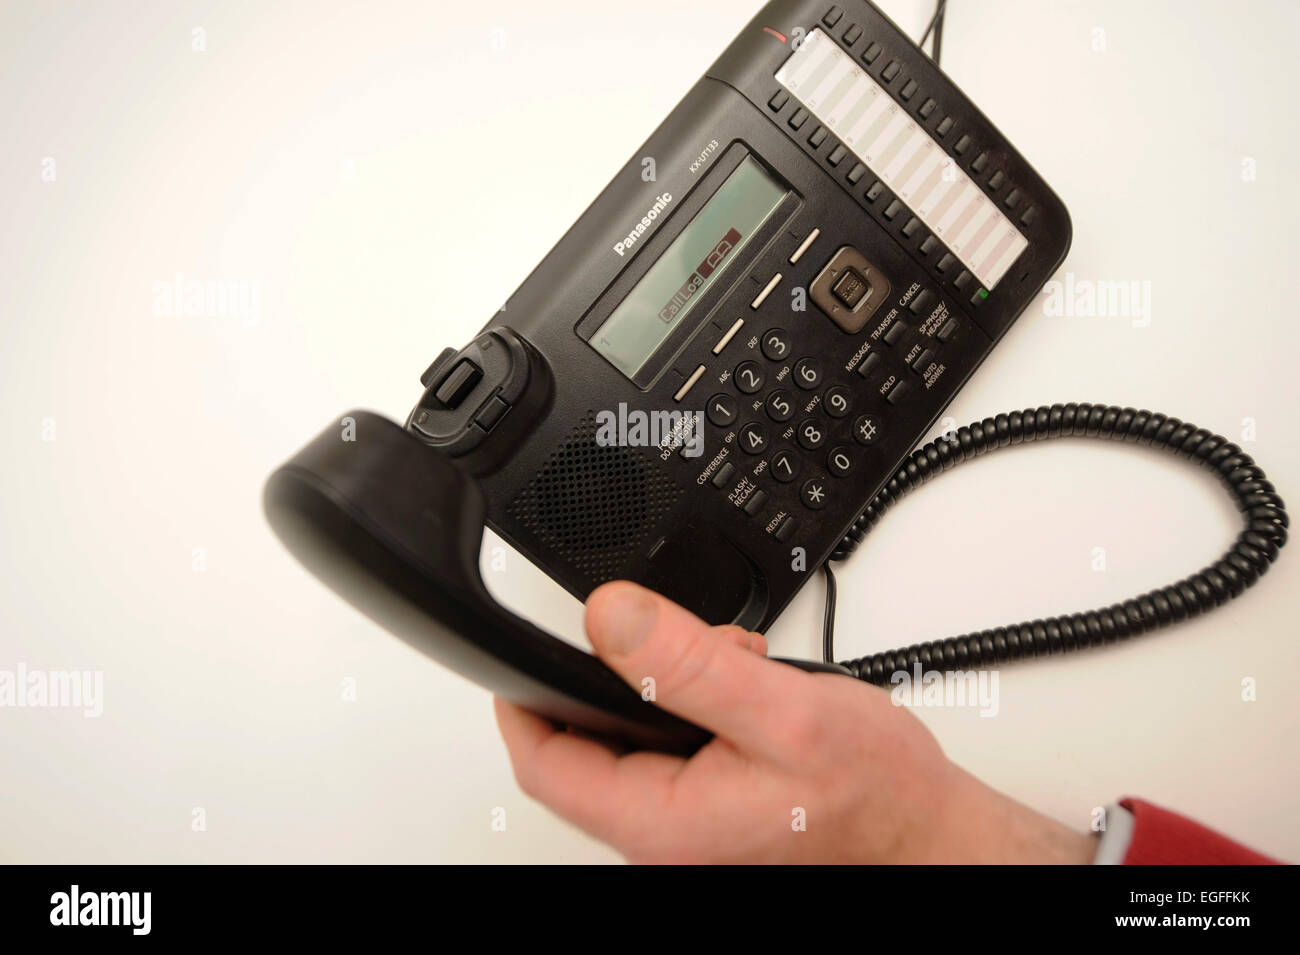 Picking up a Office Phone Stock Photo